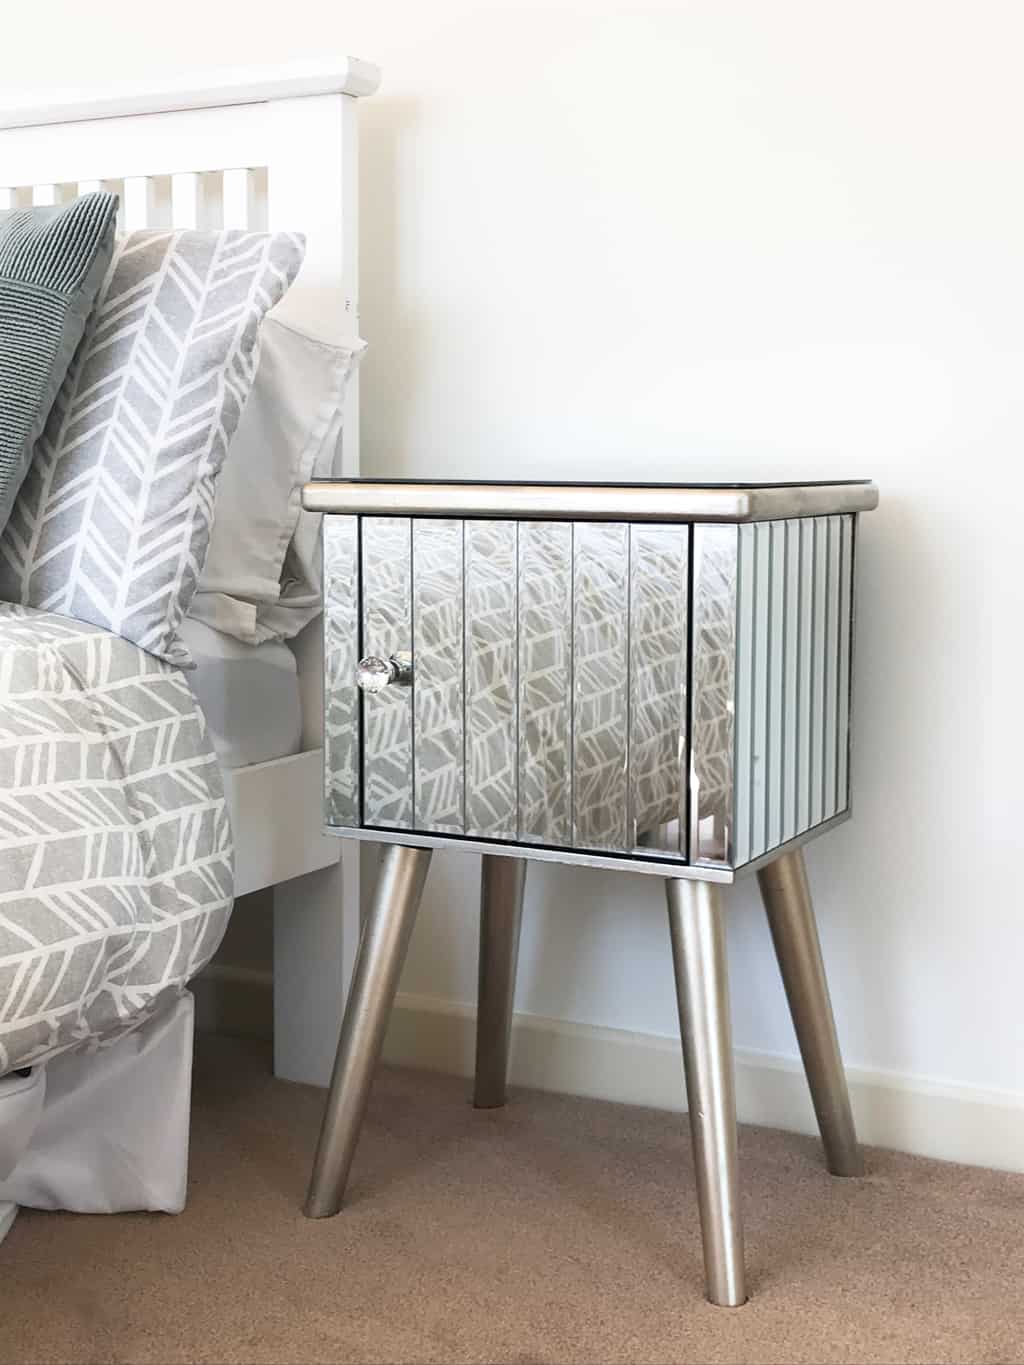 Mirrored Bedside Table Cabinet » Crystal knob